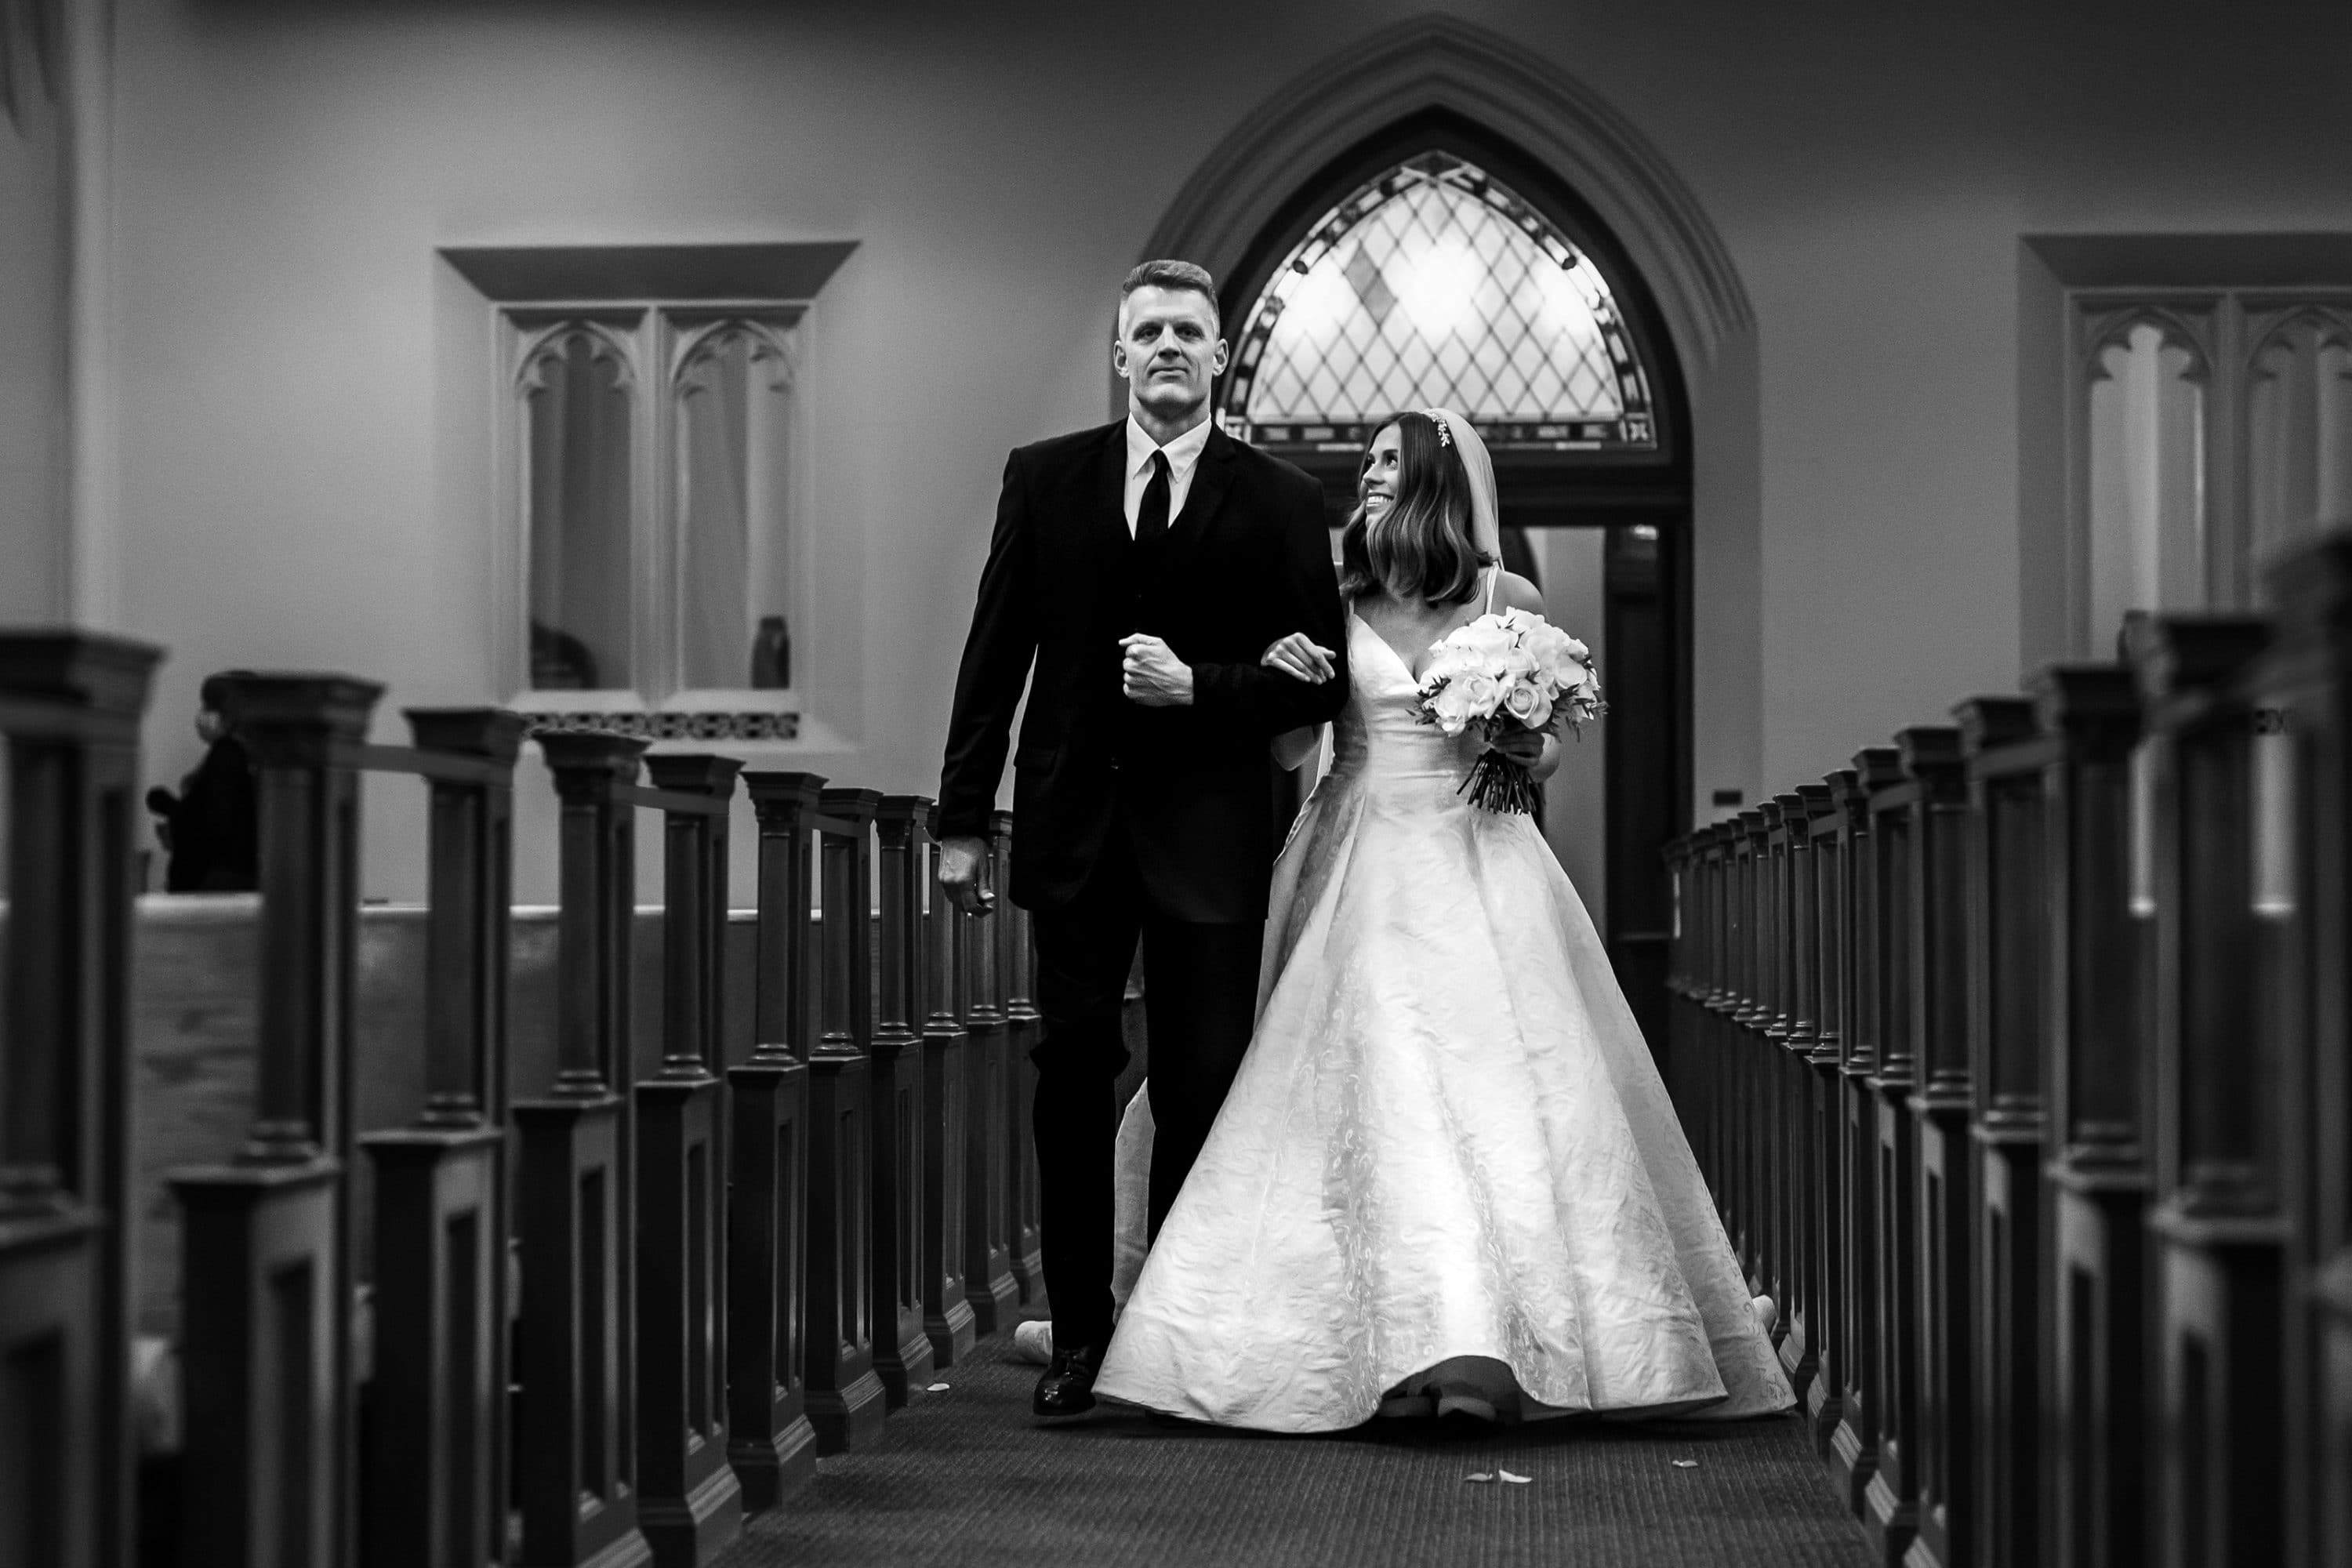 Bride and bride's father walk down the aisle at Blessed Sacrament Catholic Church in Denver, Colorado.